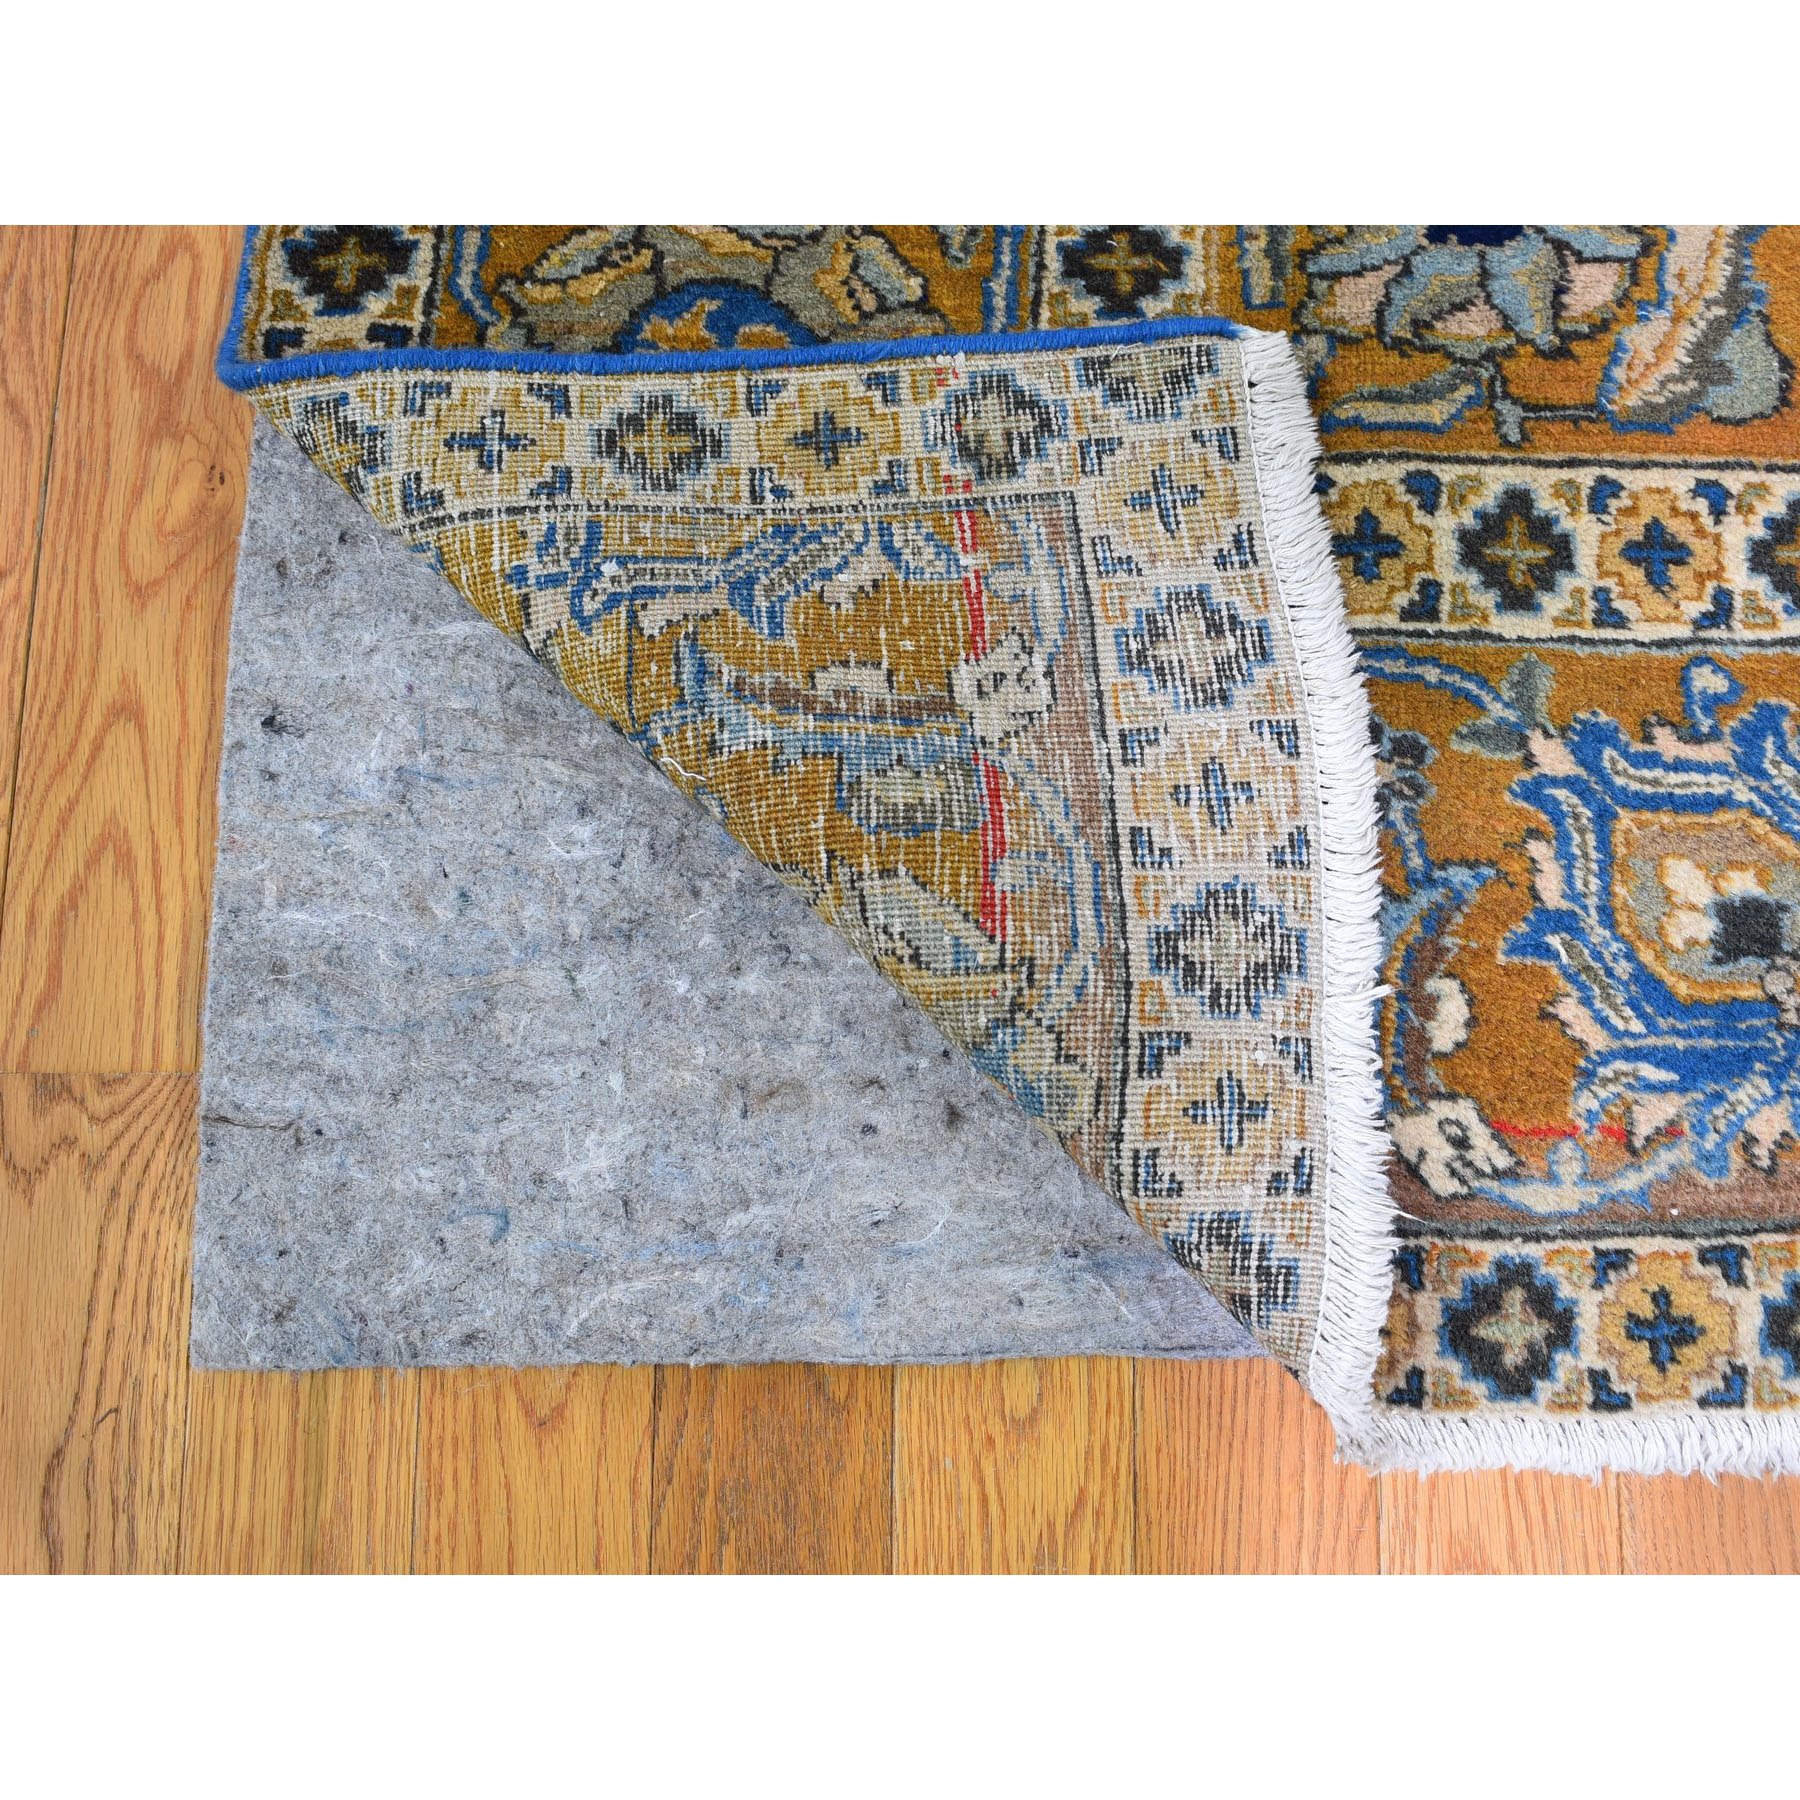 9-3 x12-8  Navy And Gold Antique Persian Tabriz Pure Wool Hand Knotted Oriental Rug 